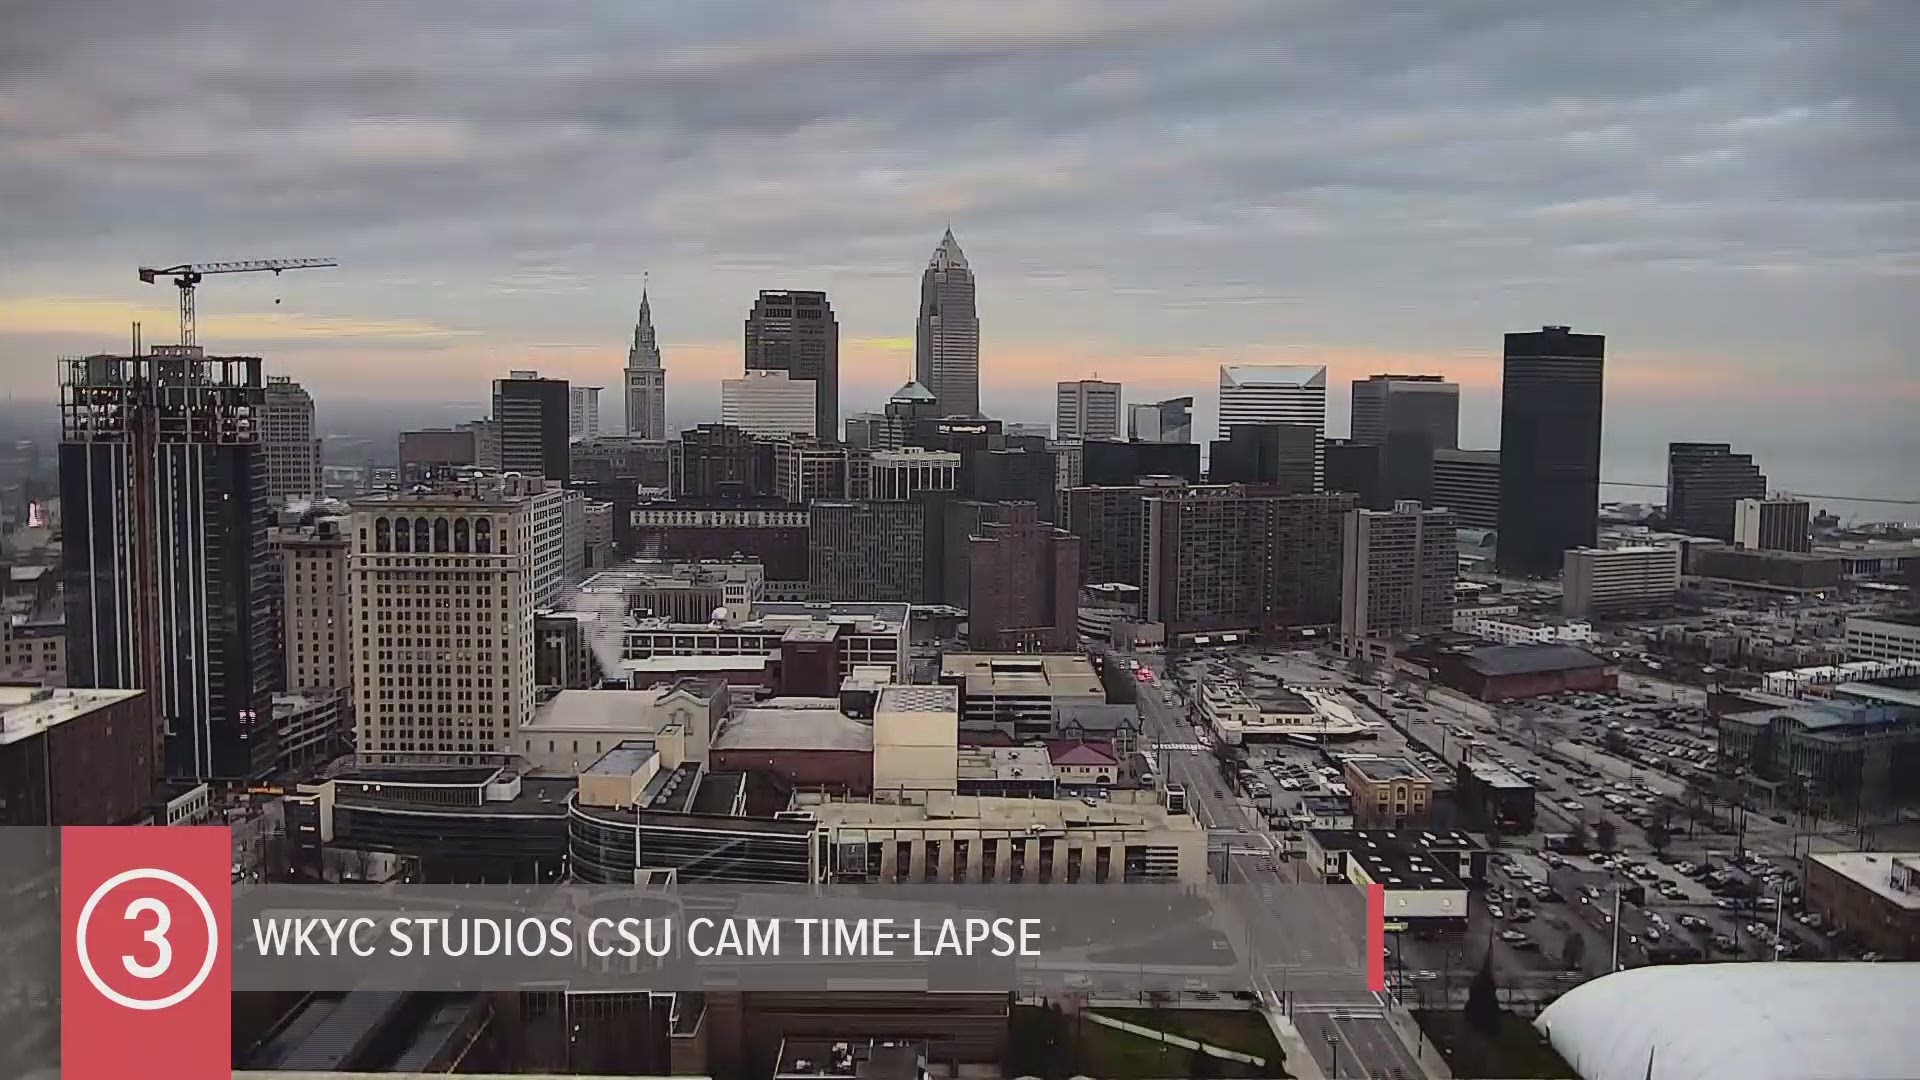 We actually saw some blue skies on Tuesday in the Cleveland area. Here's today's weather time-lapse from the WKYC Studios CSU Cam. #3weather